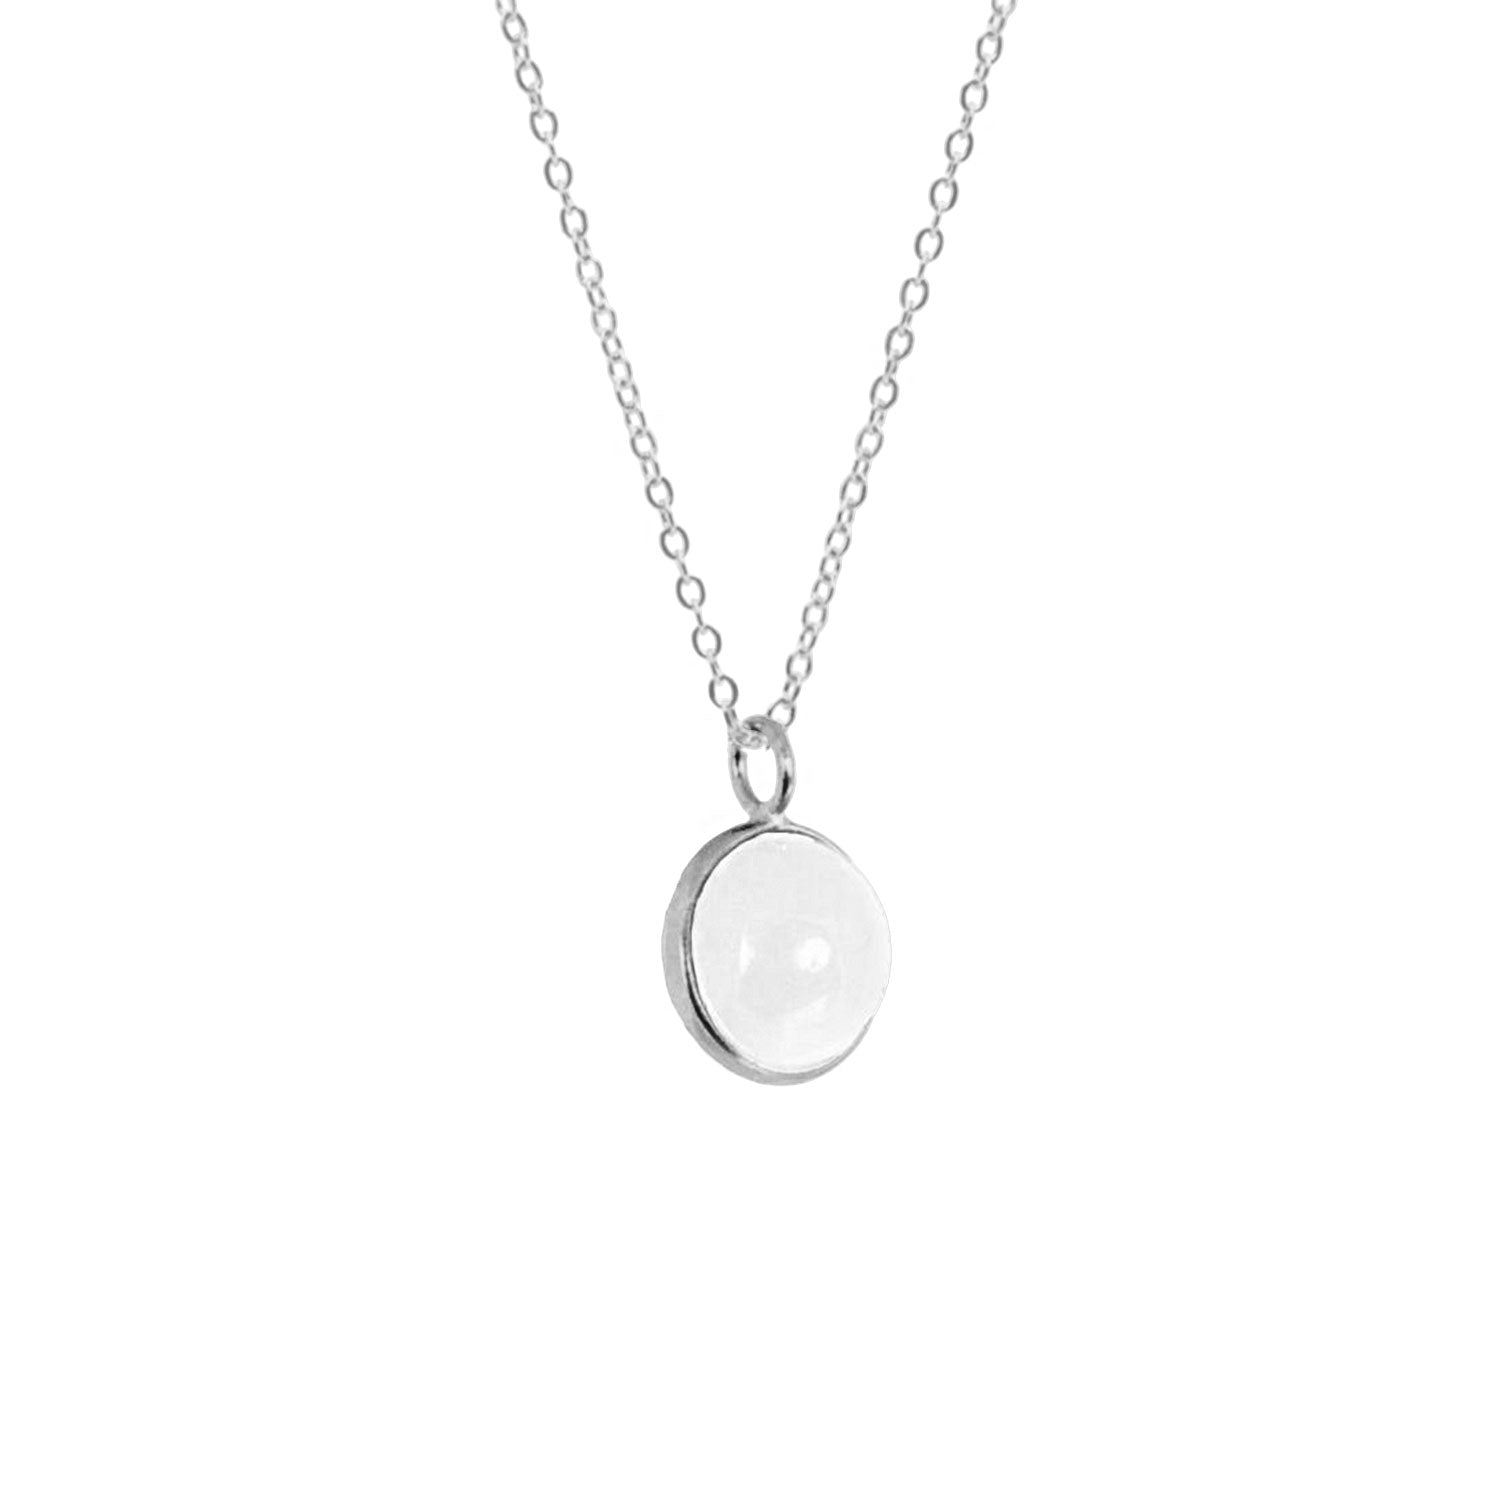 Magic Rock Crystal Ball in Sterling Silver on Sterling Silver Chain